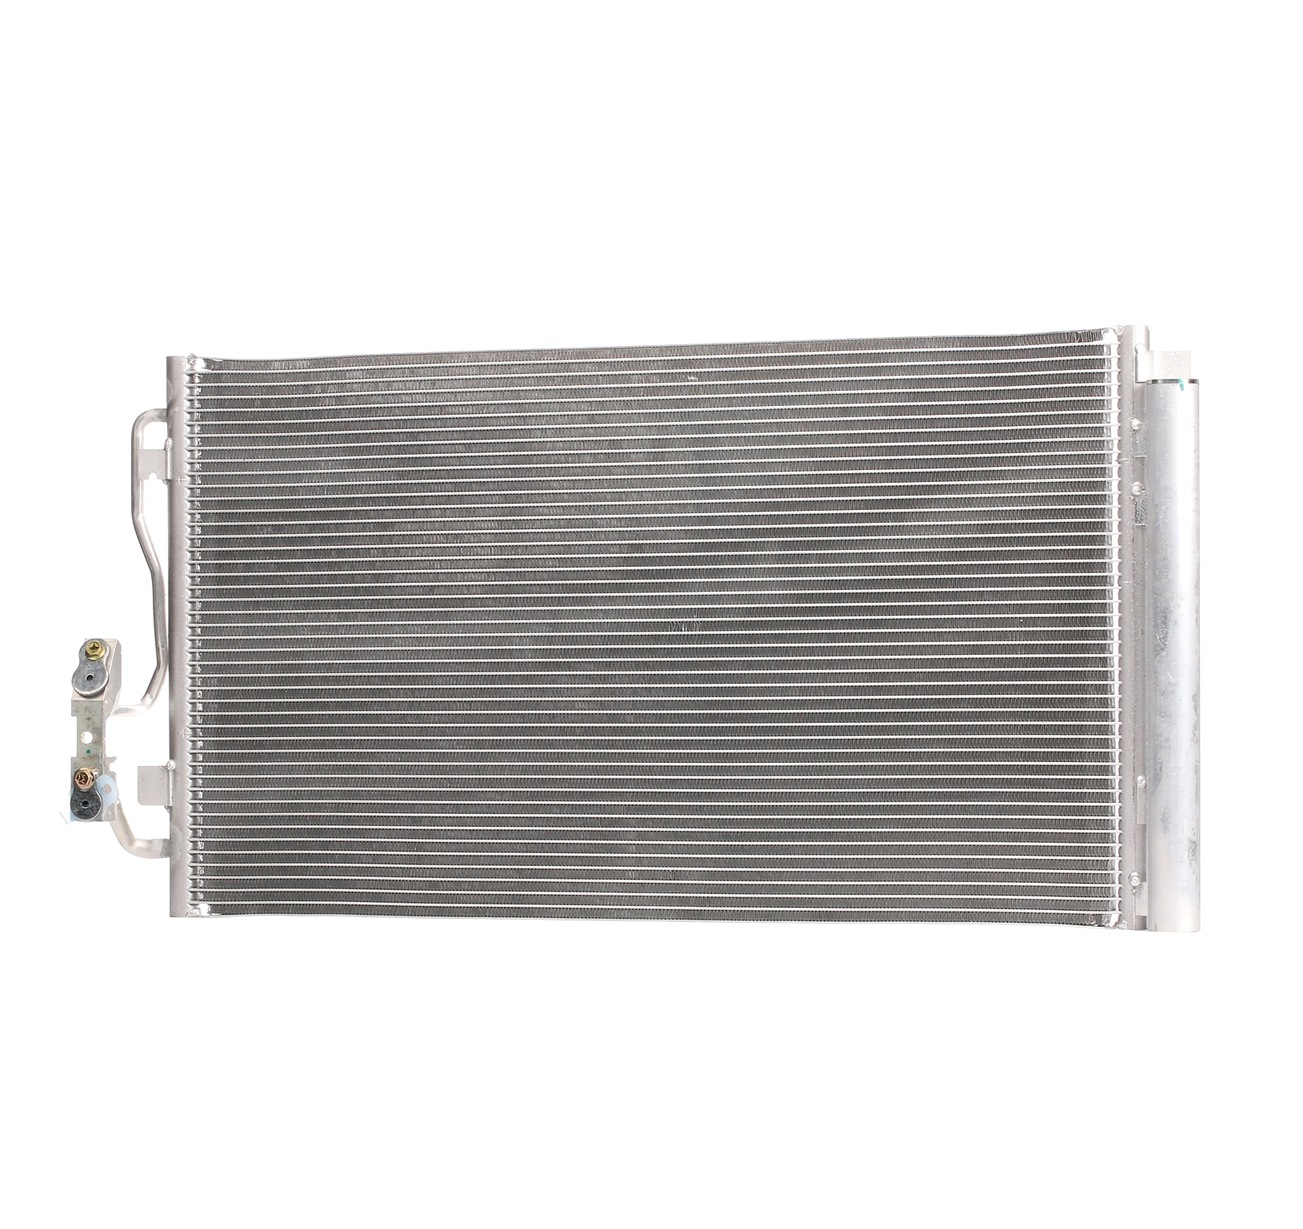 STARK with dryer, 15,3mm, 13,7mm, Aluminium, R 134a, 352mm Refrigerant: R 134a Condenser, air conditioning SKCD-0110390 buy